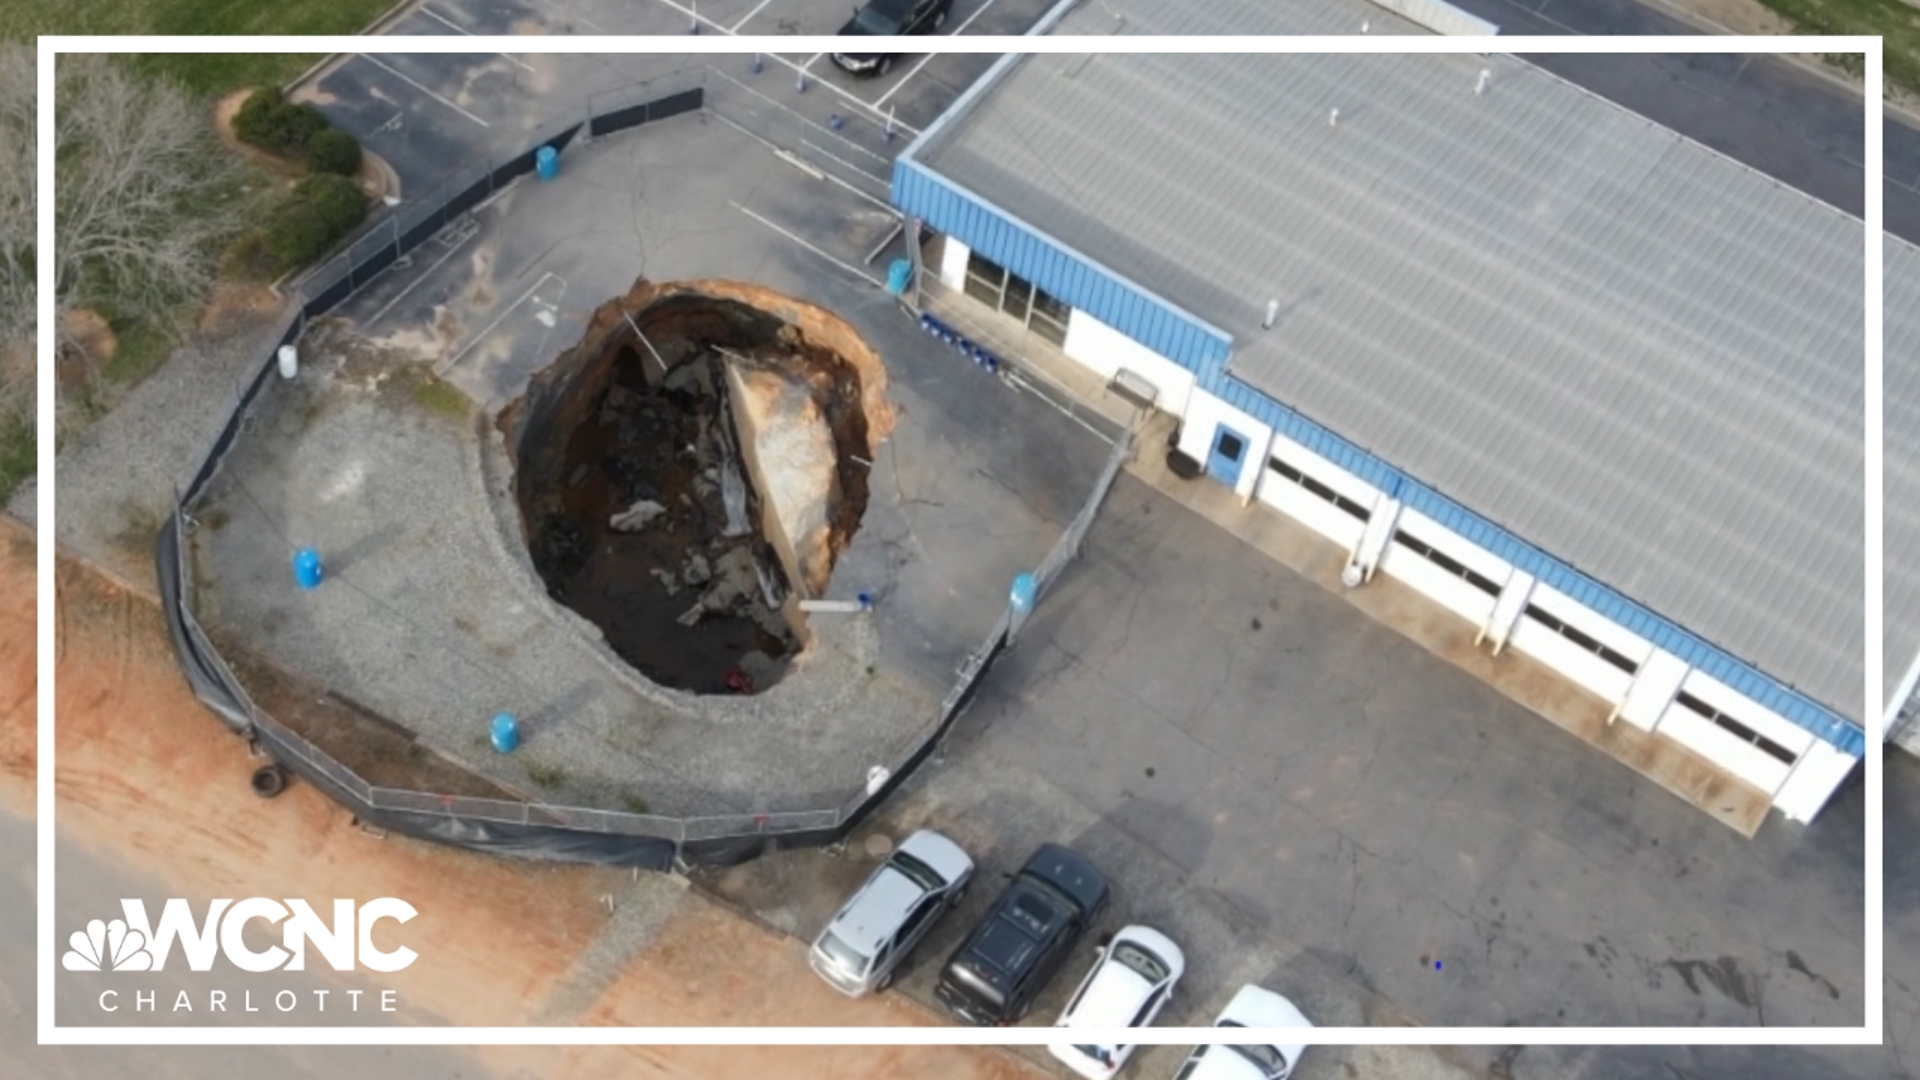 Tire Masters closed in February after being in business for nearly 30 years. The massive sinkhole closed off a large part of the company's property.